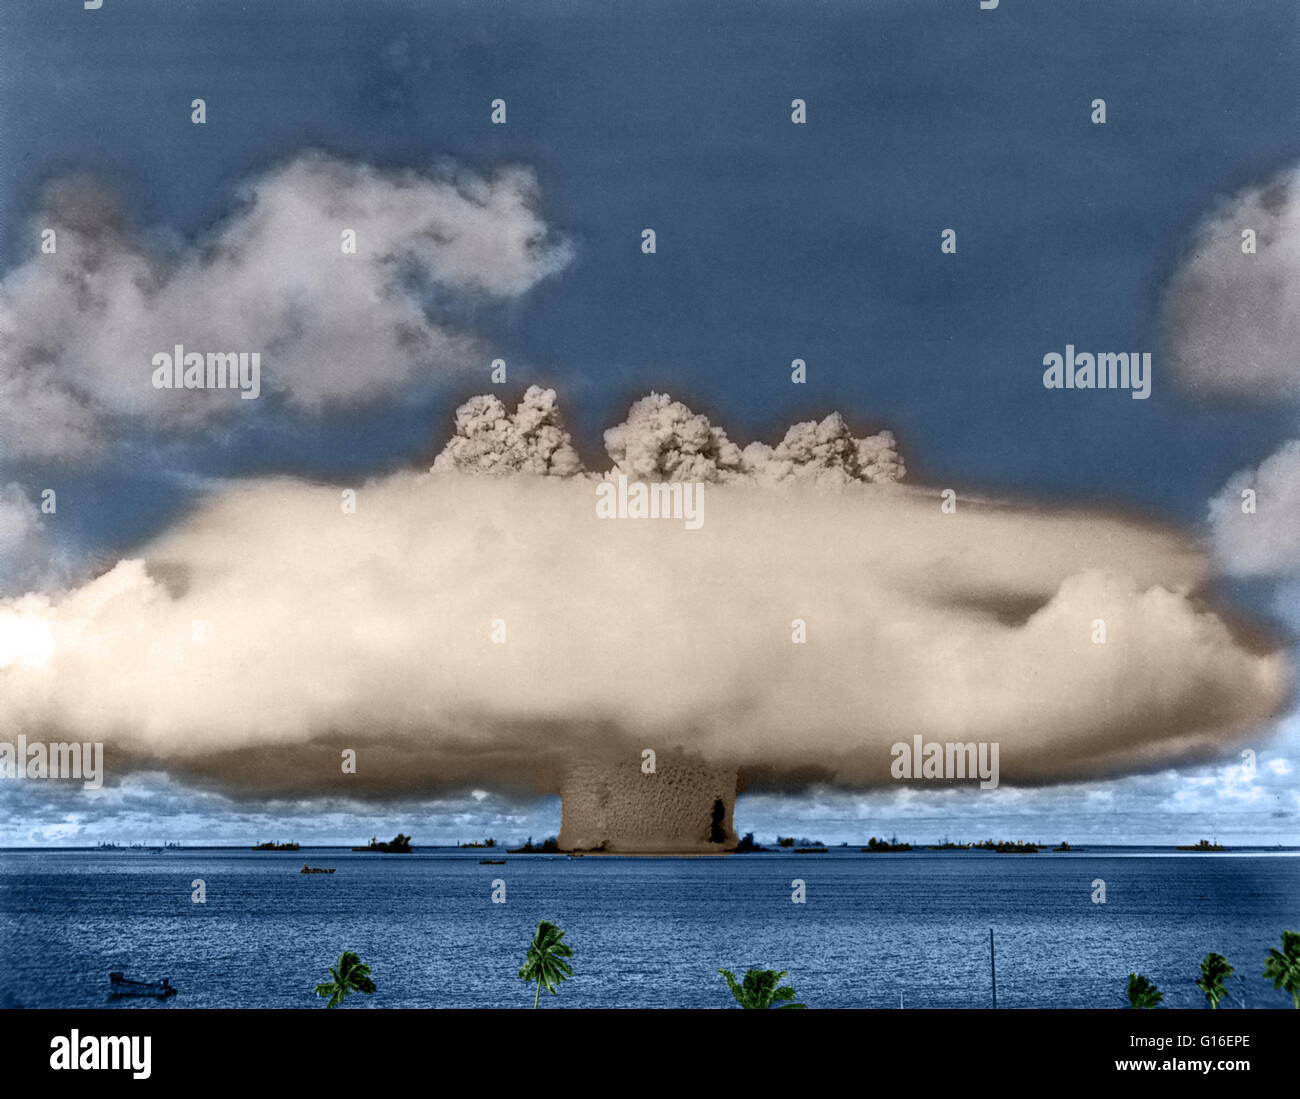 Colorized image of BAKER nuclear test at Bikini Atoll. The nuclear bomb was detonated at 90 feet underwater on July 25th, 1946 as part of Operation Crossroads. The purpose of Operation Crossroads nuclear weapon tests was to investigate the effect of nucle Stock Photo